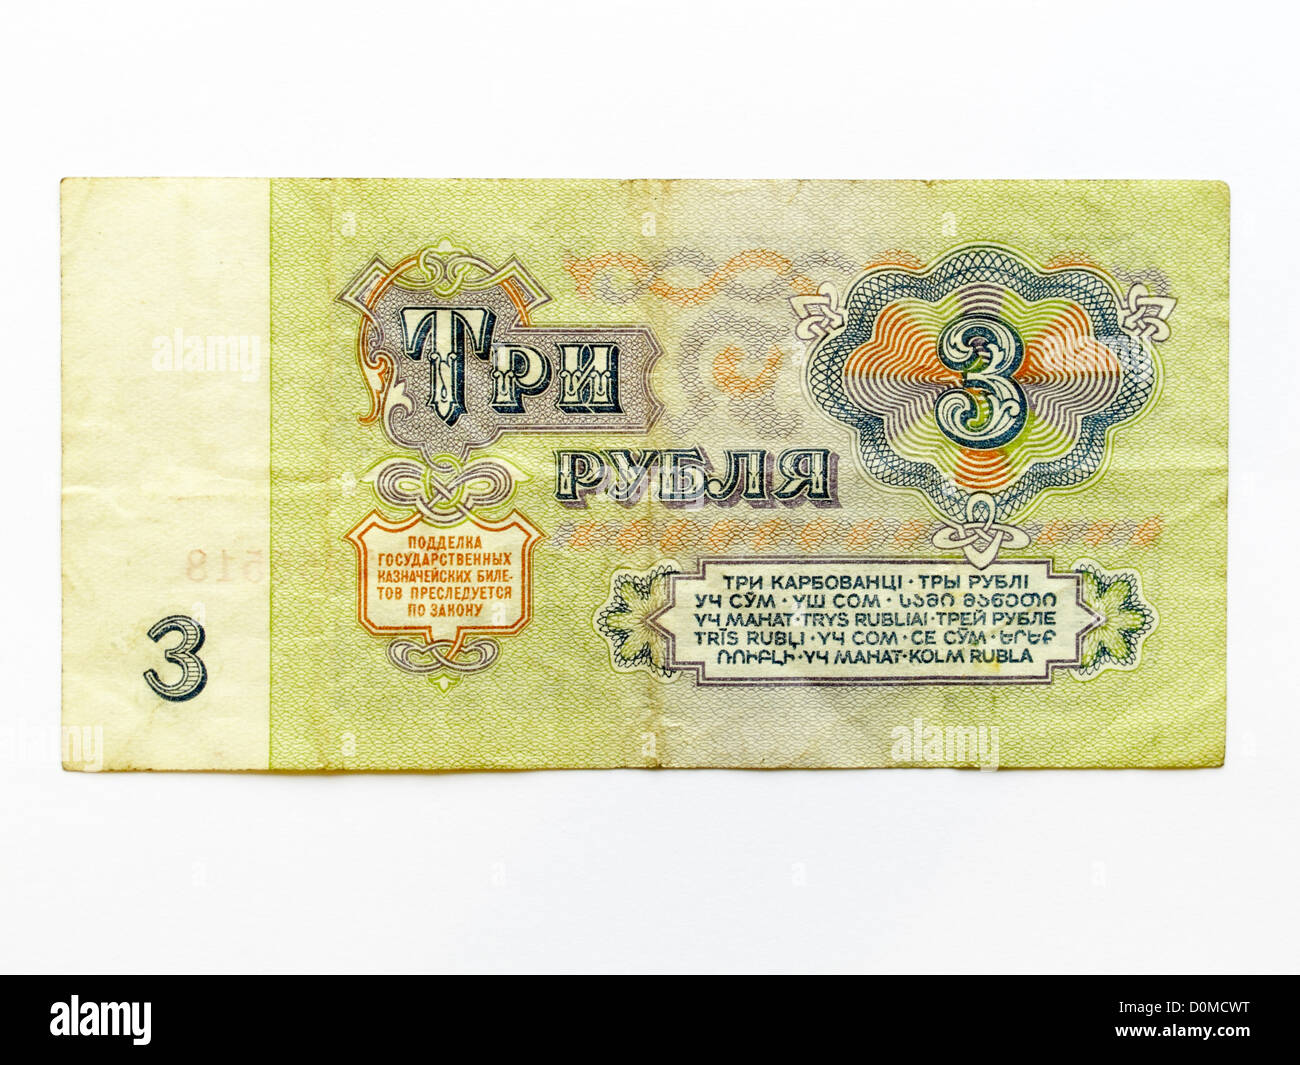 3 Three ruble rouble note 1961 russian russia soviet communist banknote money Stock Photo